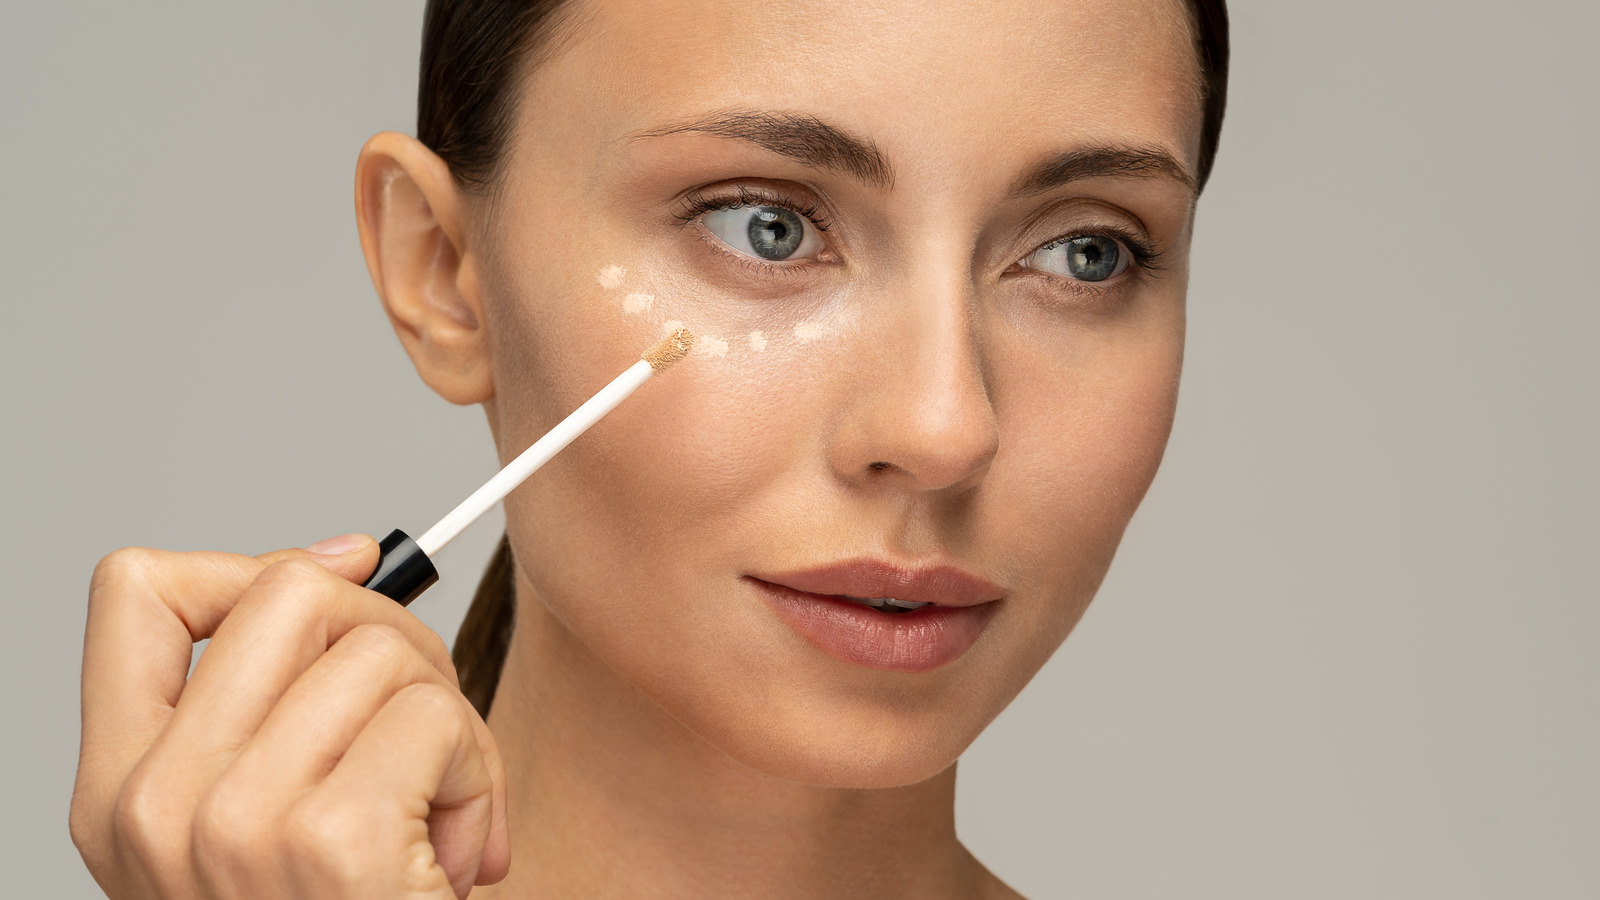 When You Contour Every Day, This Is What Happens To Your Skin